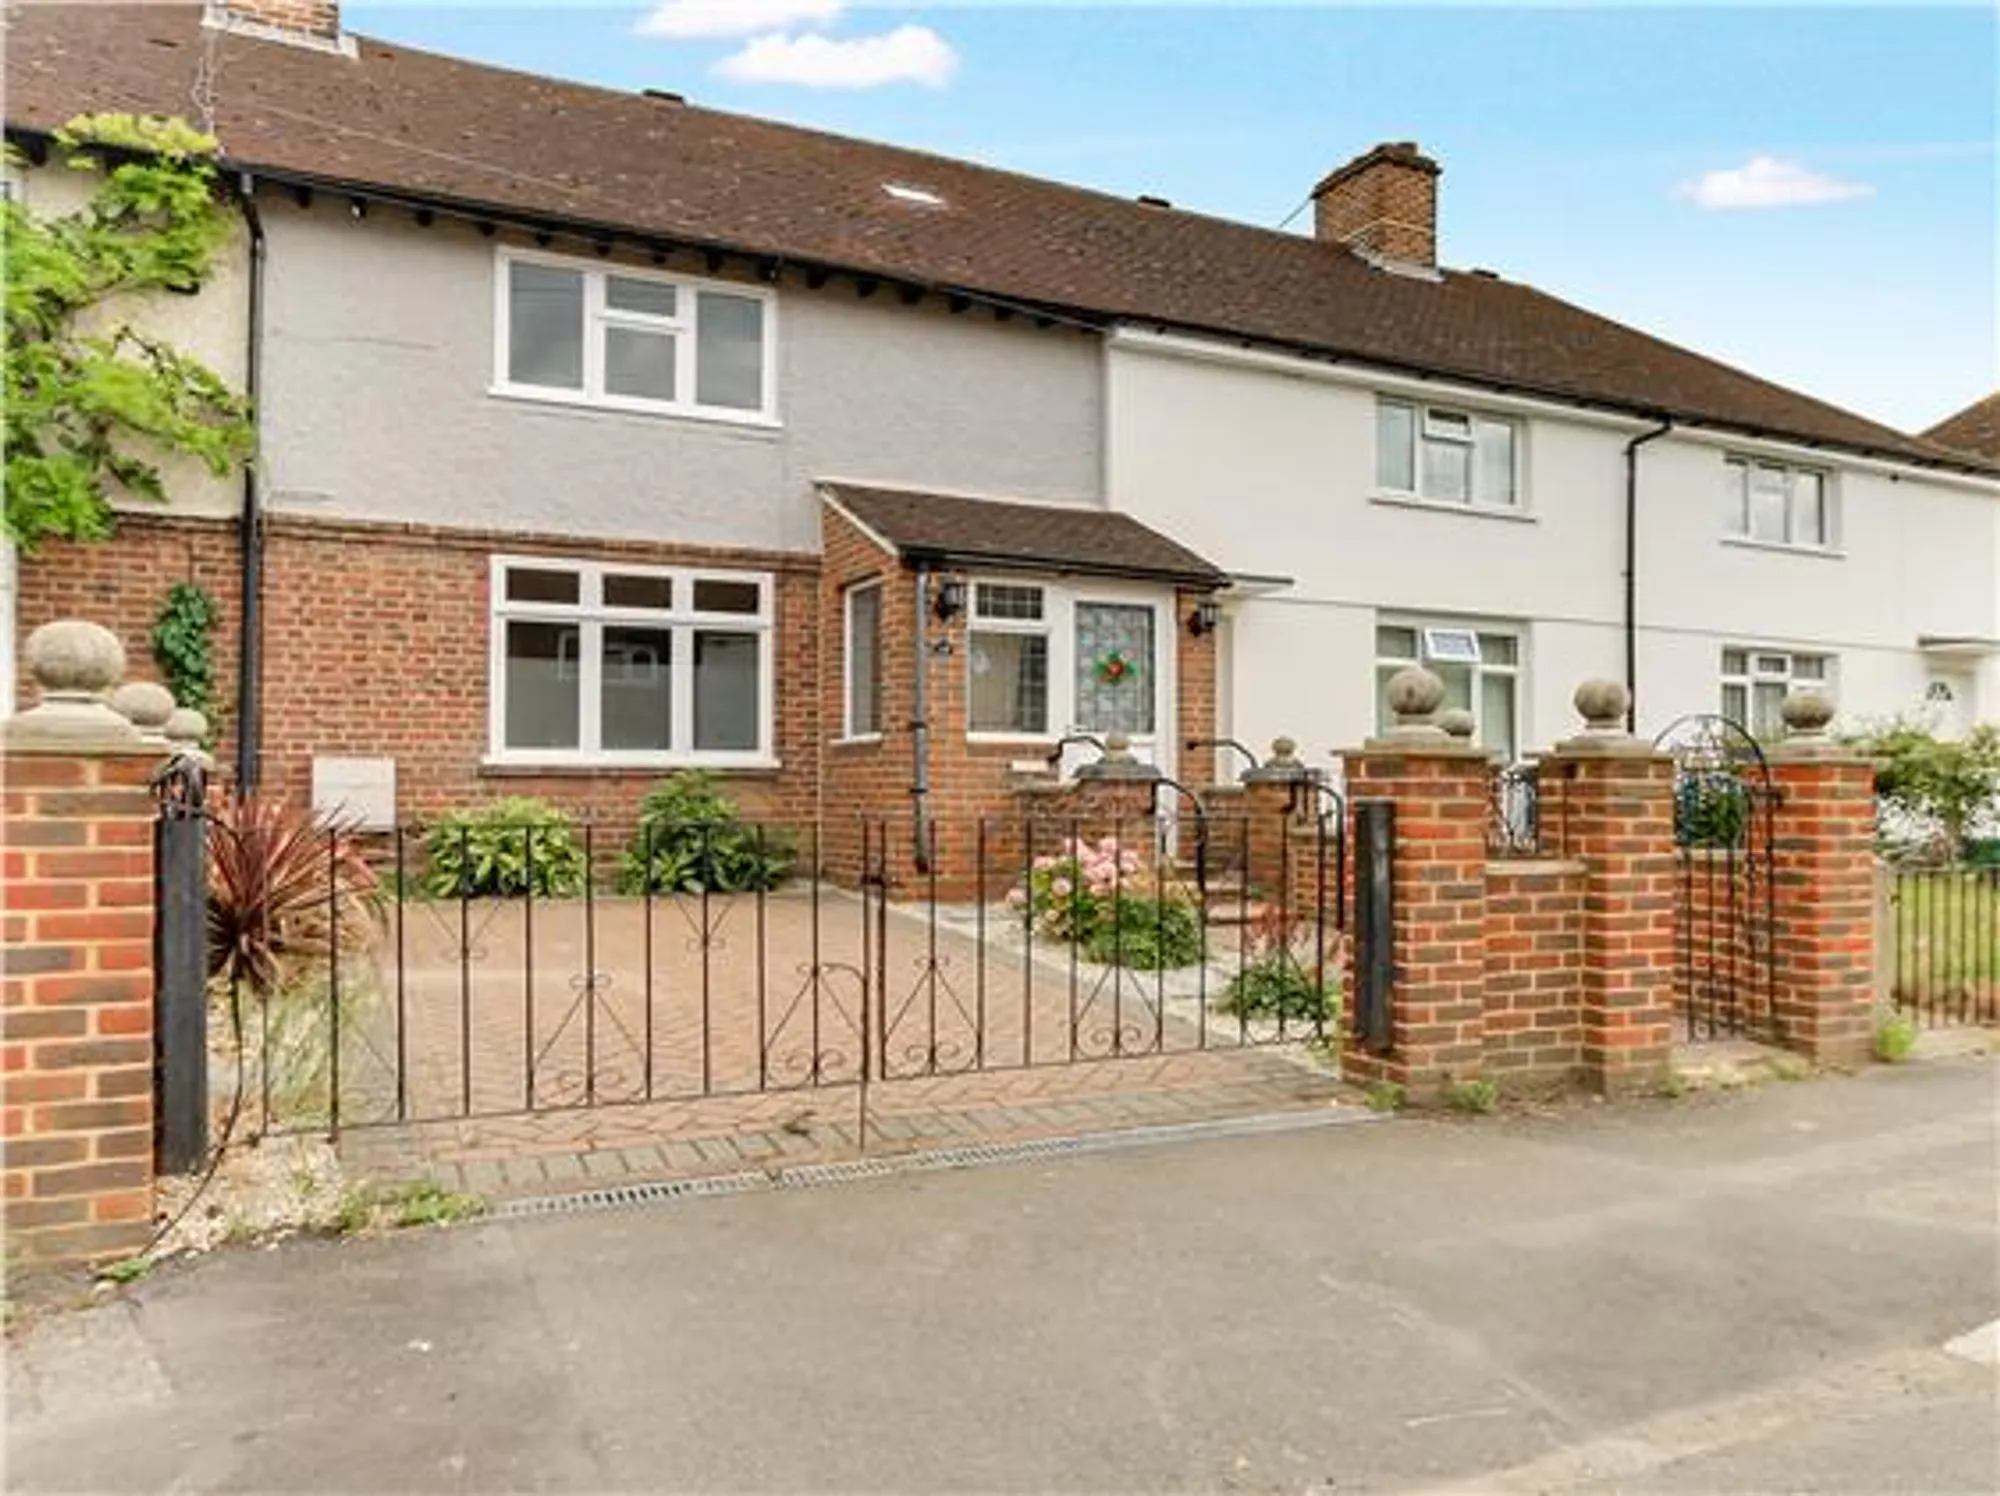 3 bed terraced house for sale in Charter Road, Kingston Upon Thames - Property Image 1